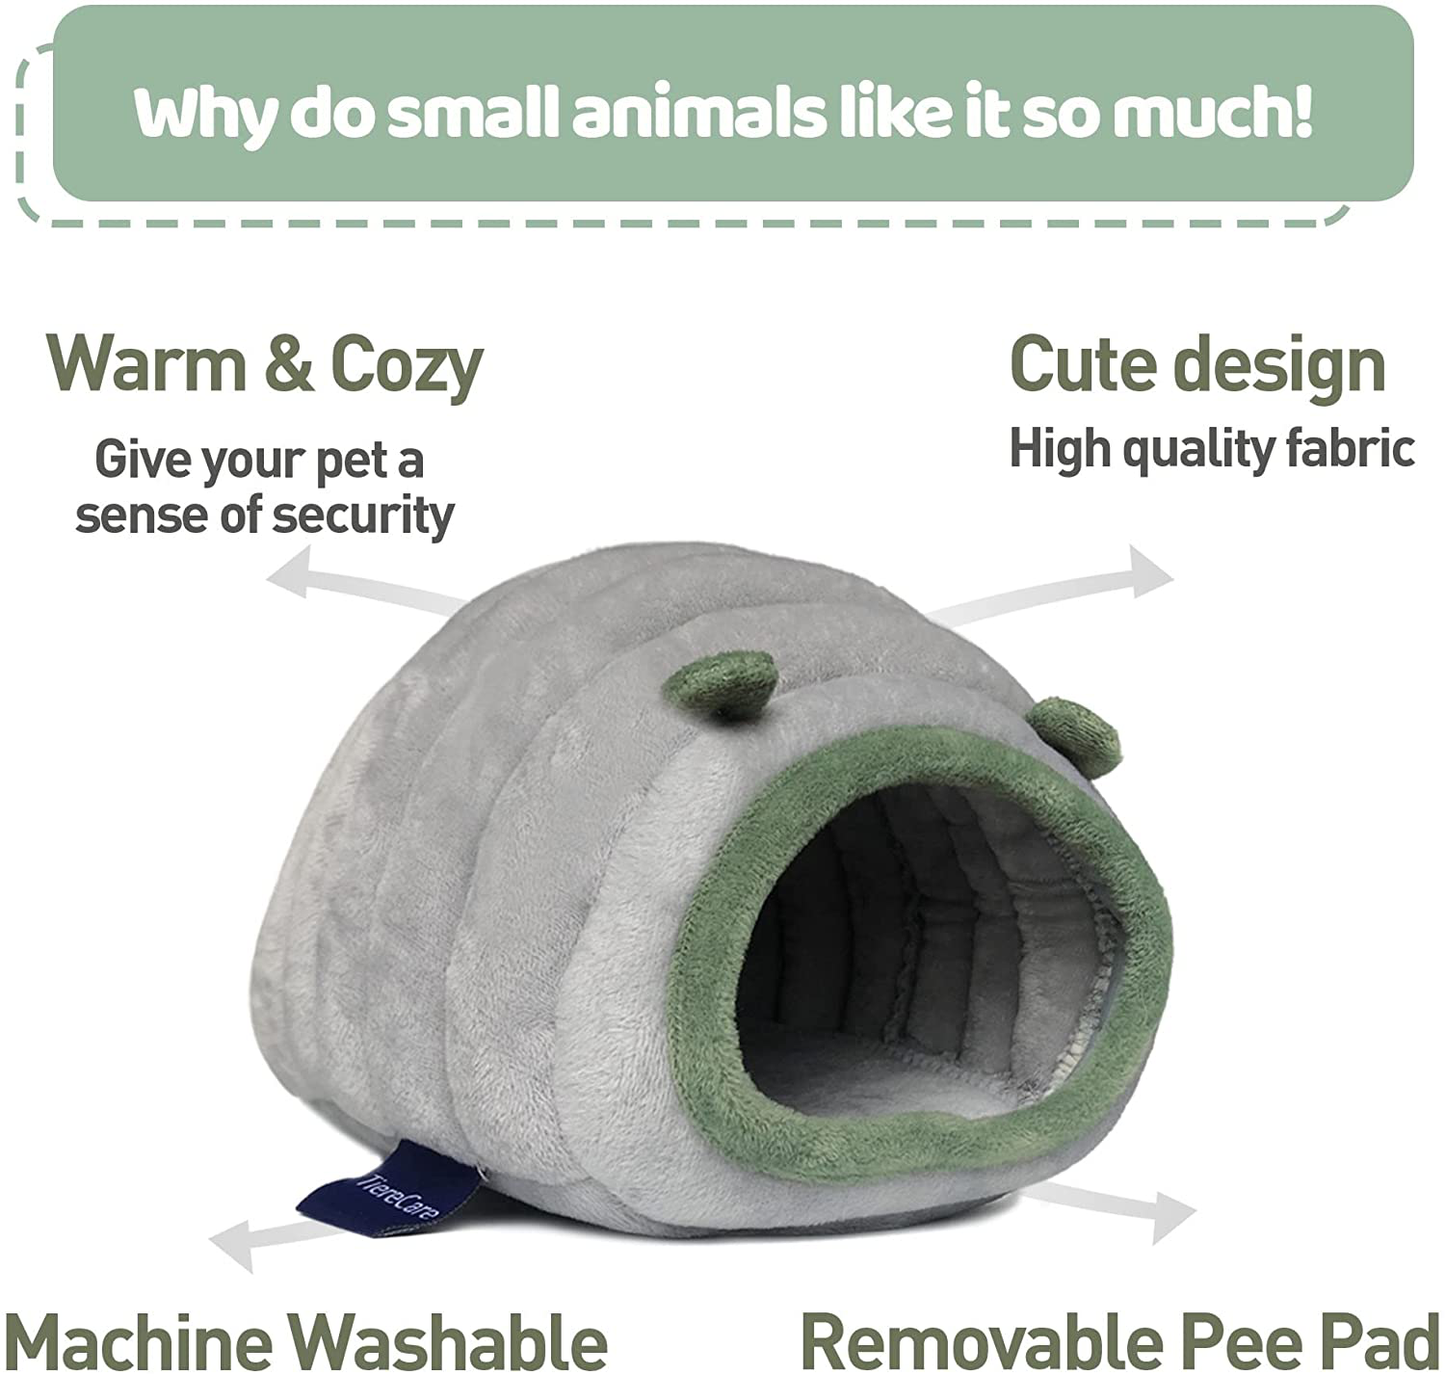 Tierecare Hamster Hideout Guinea Pig House Bed Cozy Habitat Hideaway Warm Cage Accessories for Hedgehog Ferret Chinchilla Small Animal Cute Washable